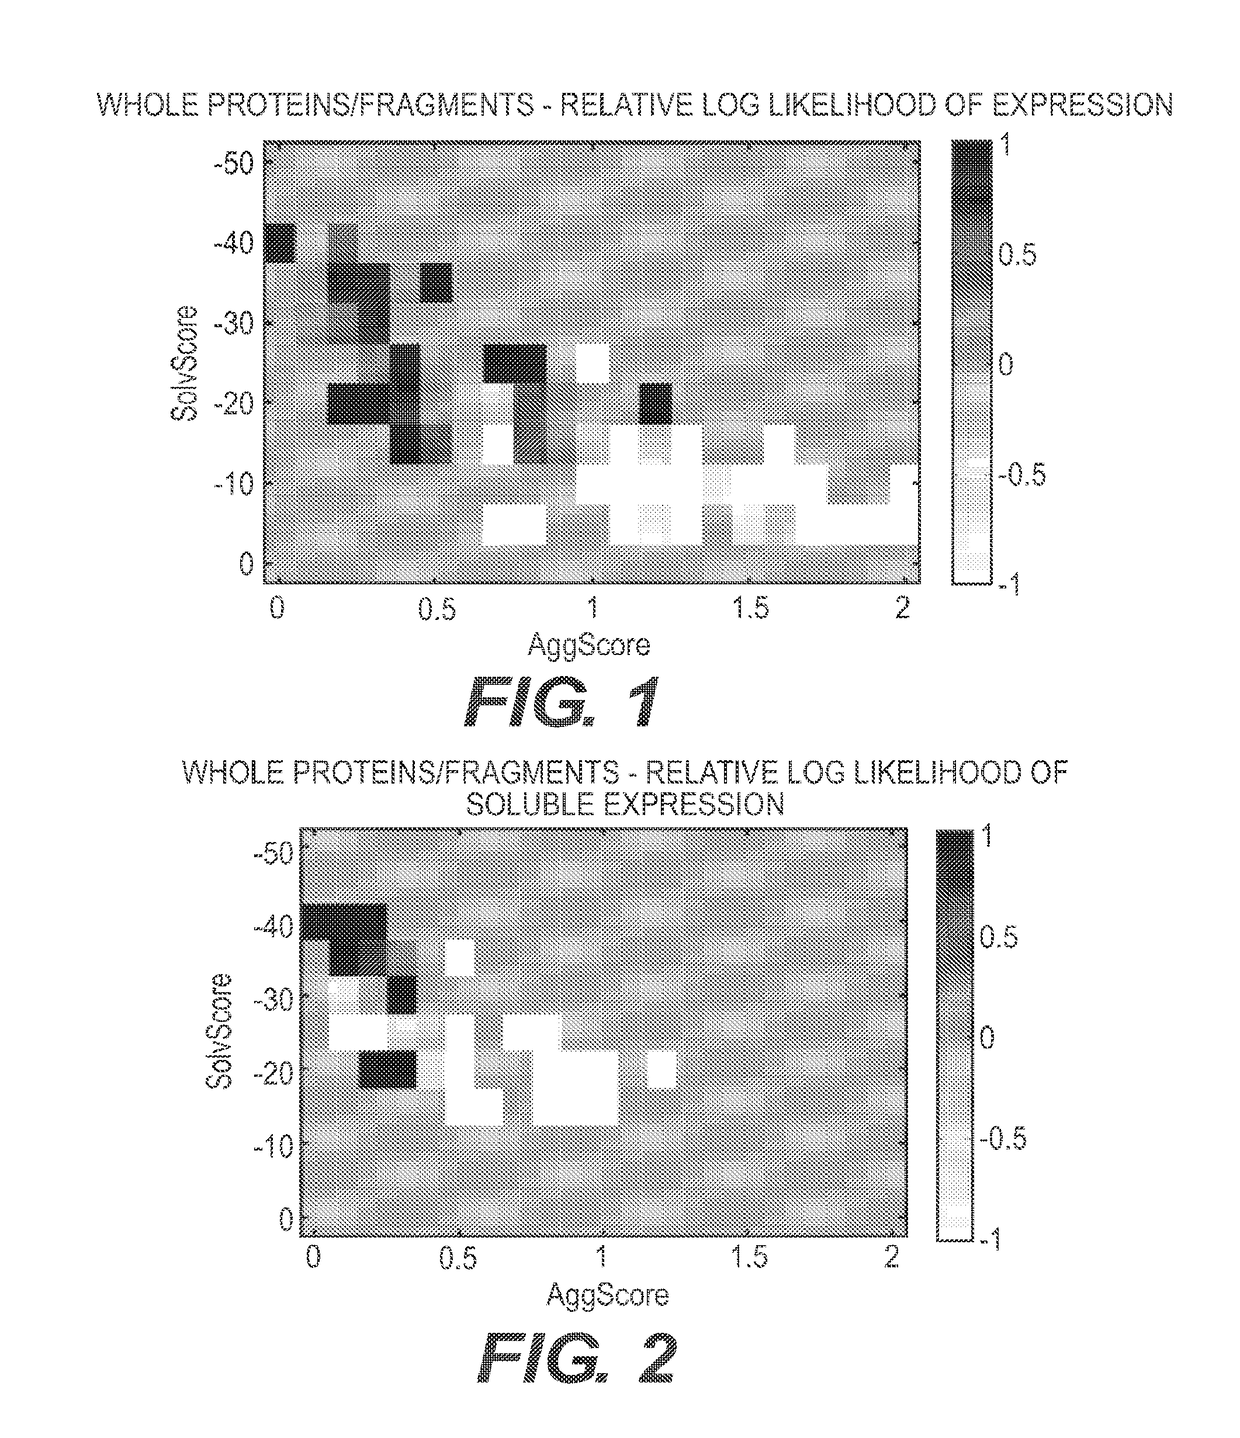 Charged Nutritive Fragments, Proteins and Methods